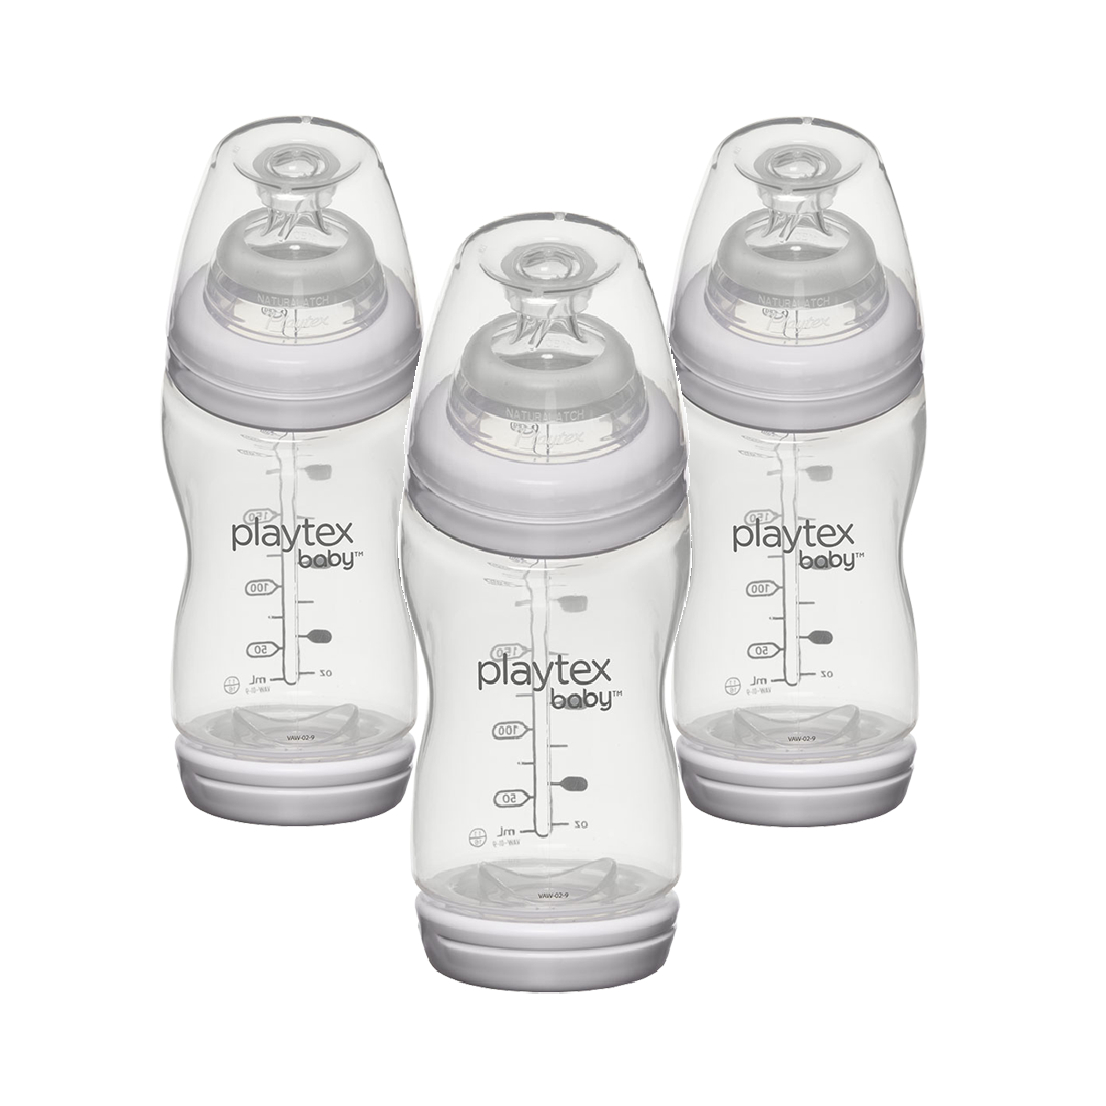 Playtex Ventaire Adv Wide Bottle 9oz 3pk - image 1 of 13